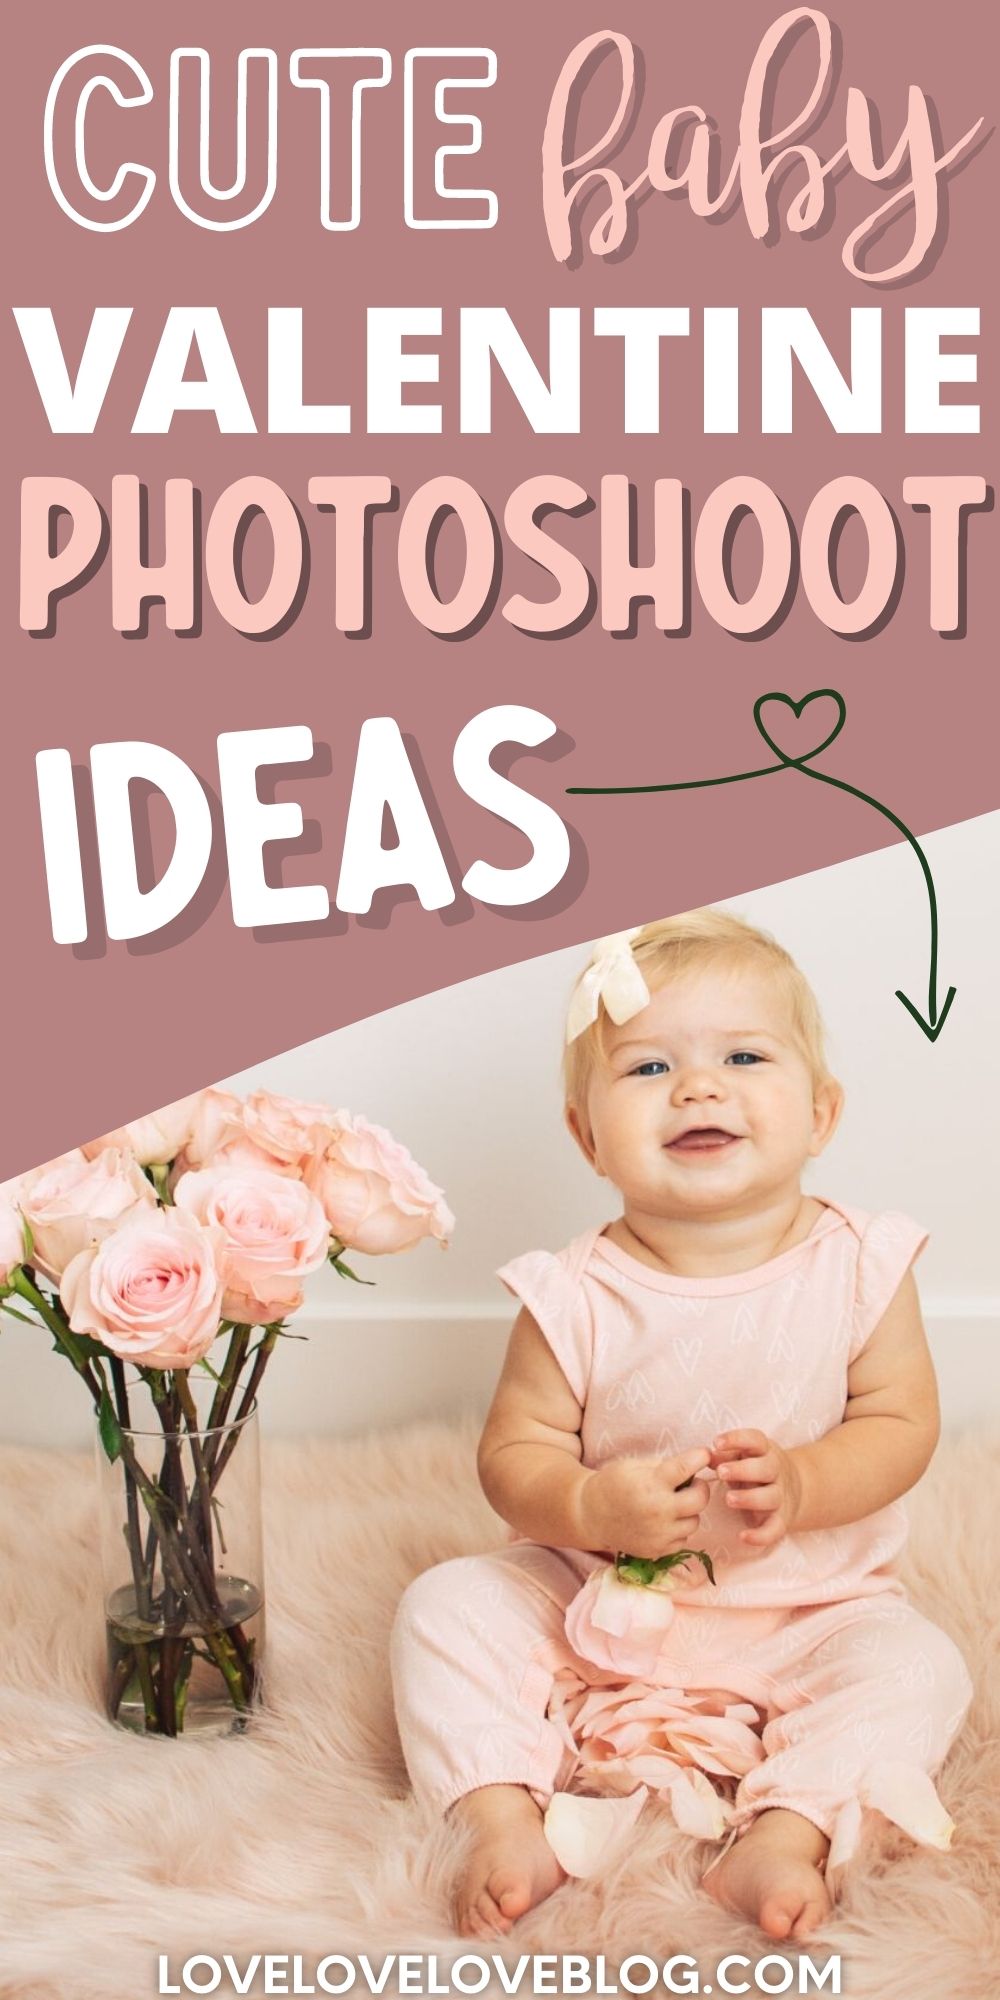 Pinterest graphic with text and a baby playing with rose petals next to a vase of roses.